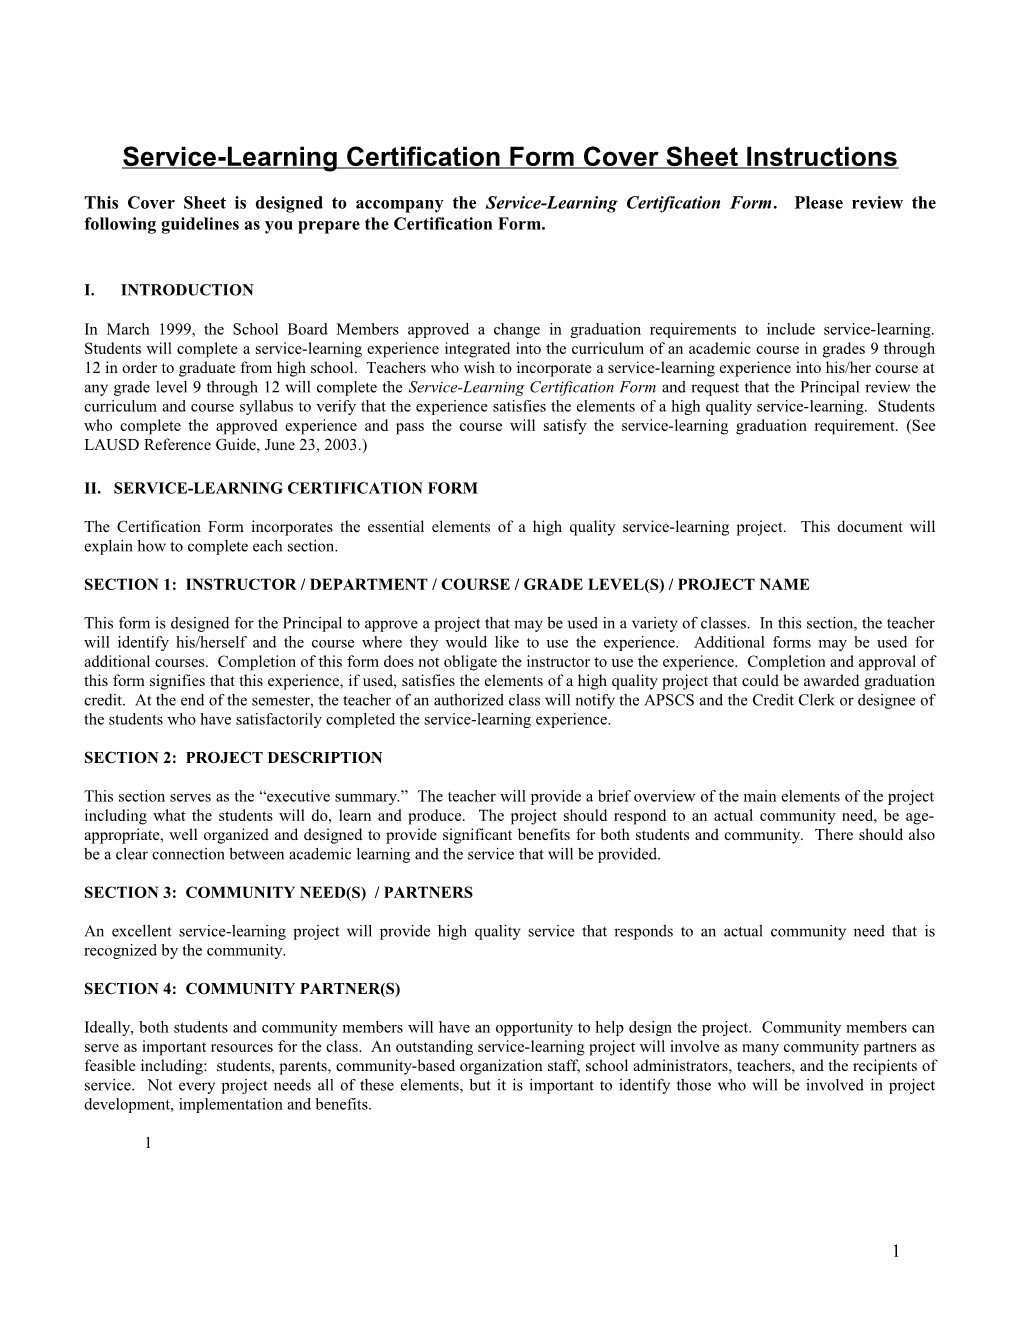 Service-Learning Certification Form Cover Sheet Instructions